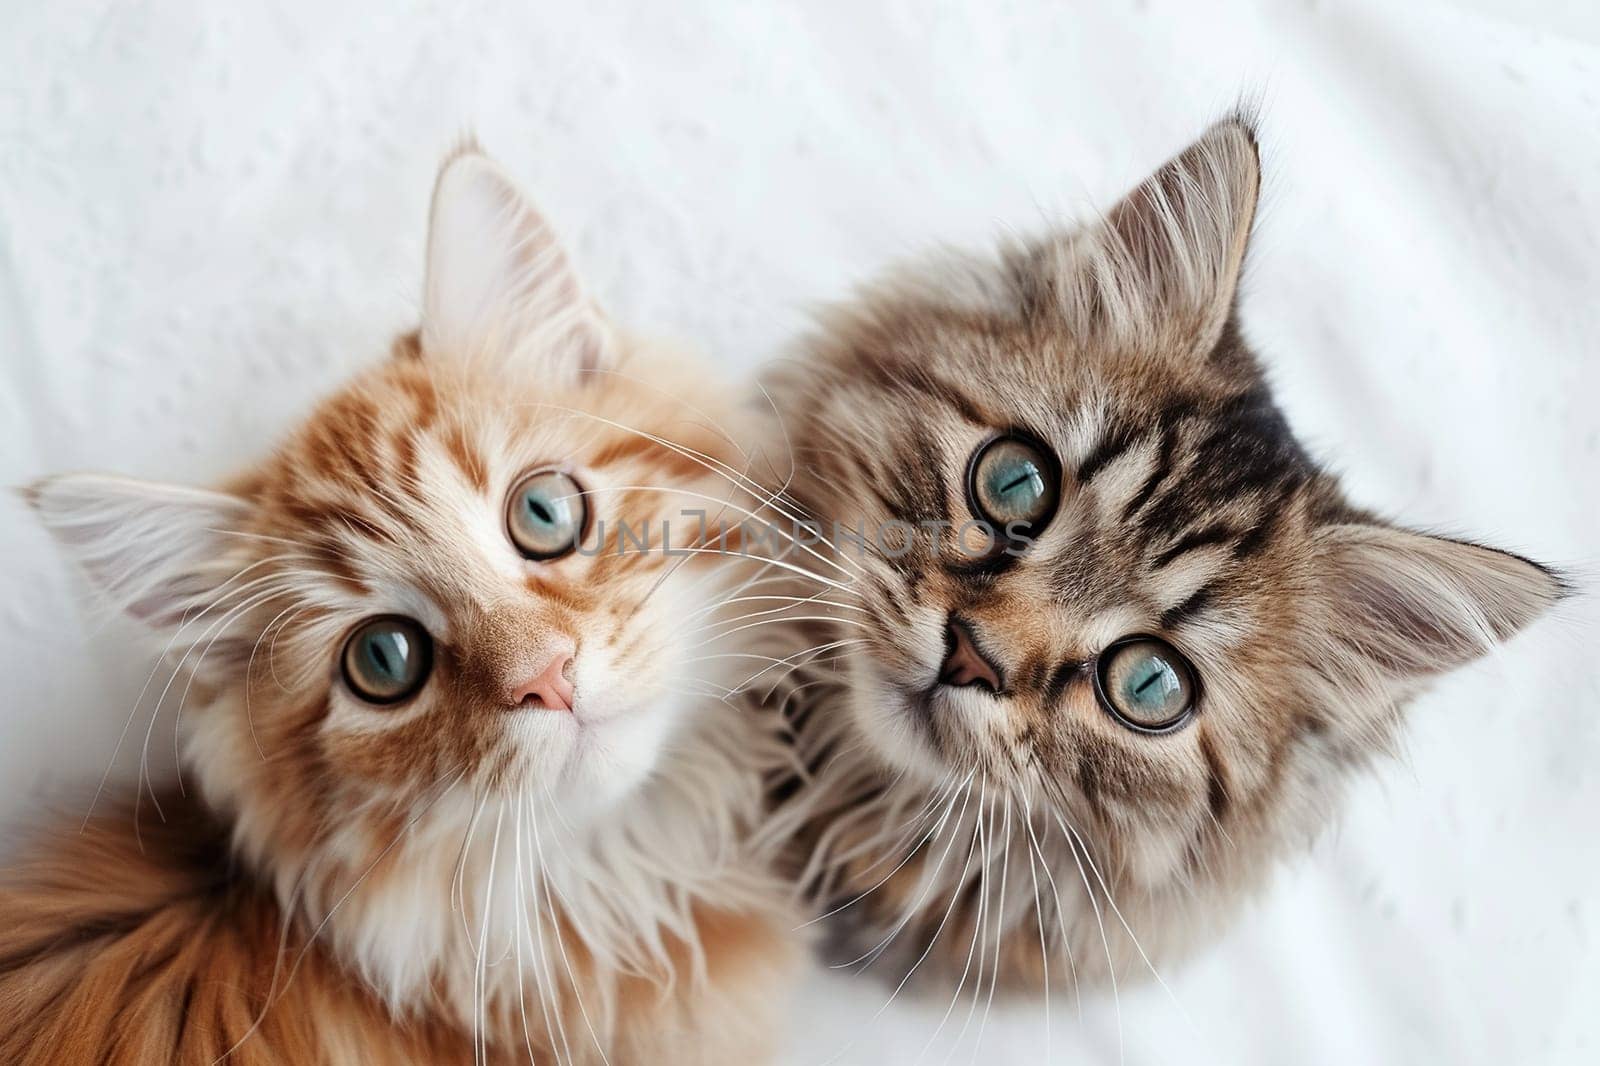 Top view of two cute tabby kittens looking at the camera.